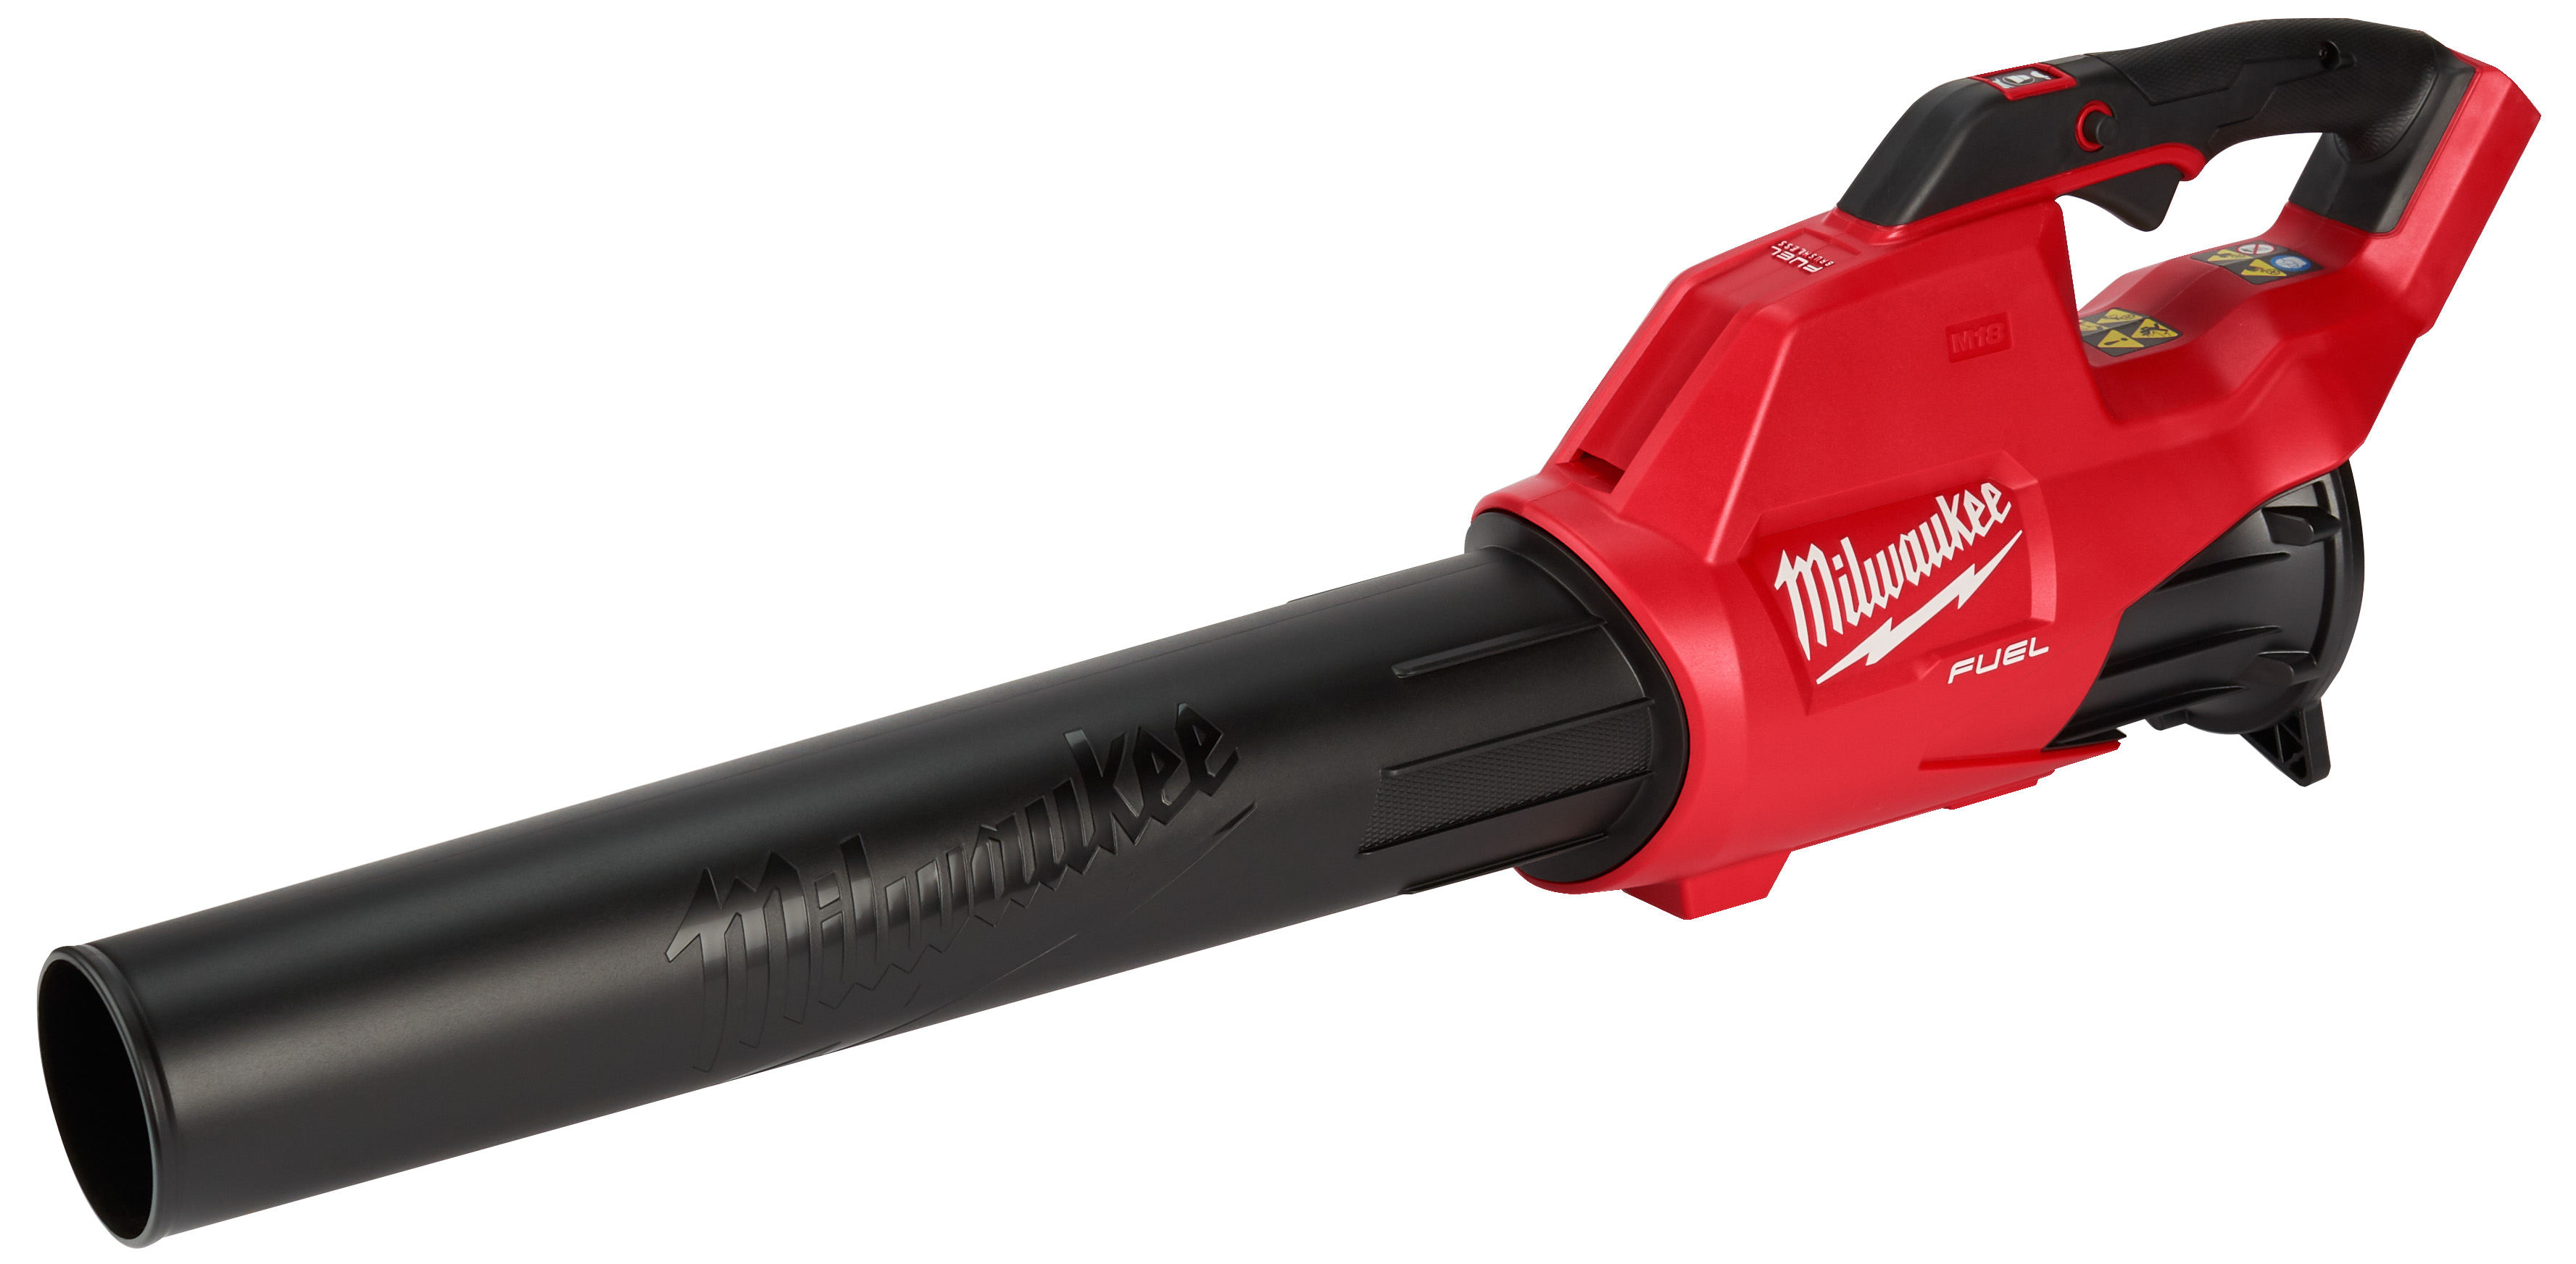 The M18 FUEL™ blower has the power to clear from 15 ft, gets to full throttle in under 1 second, and is up to 4 lbs lighter than competitors. Designed to meet landscape maintenance professional needs, the POWERSTATE™ brushless motor and REDLITHIUM™ H...